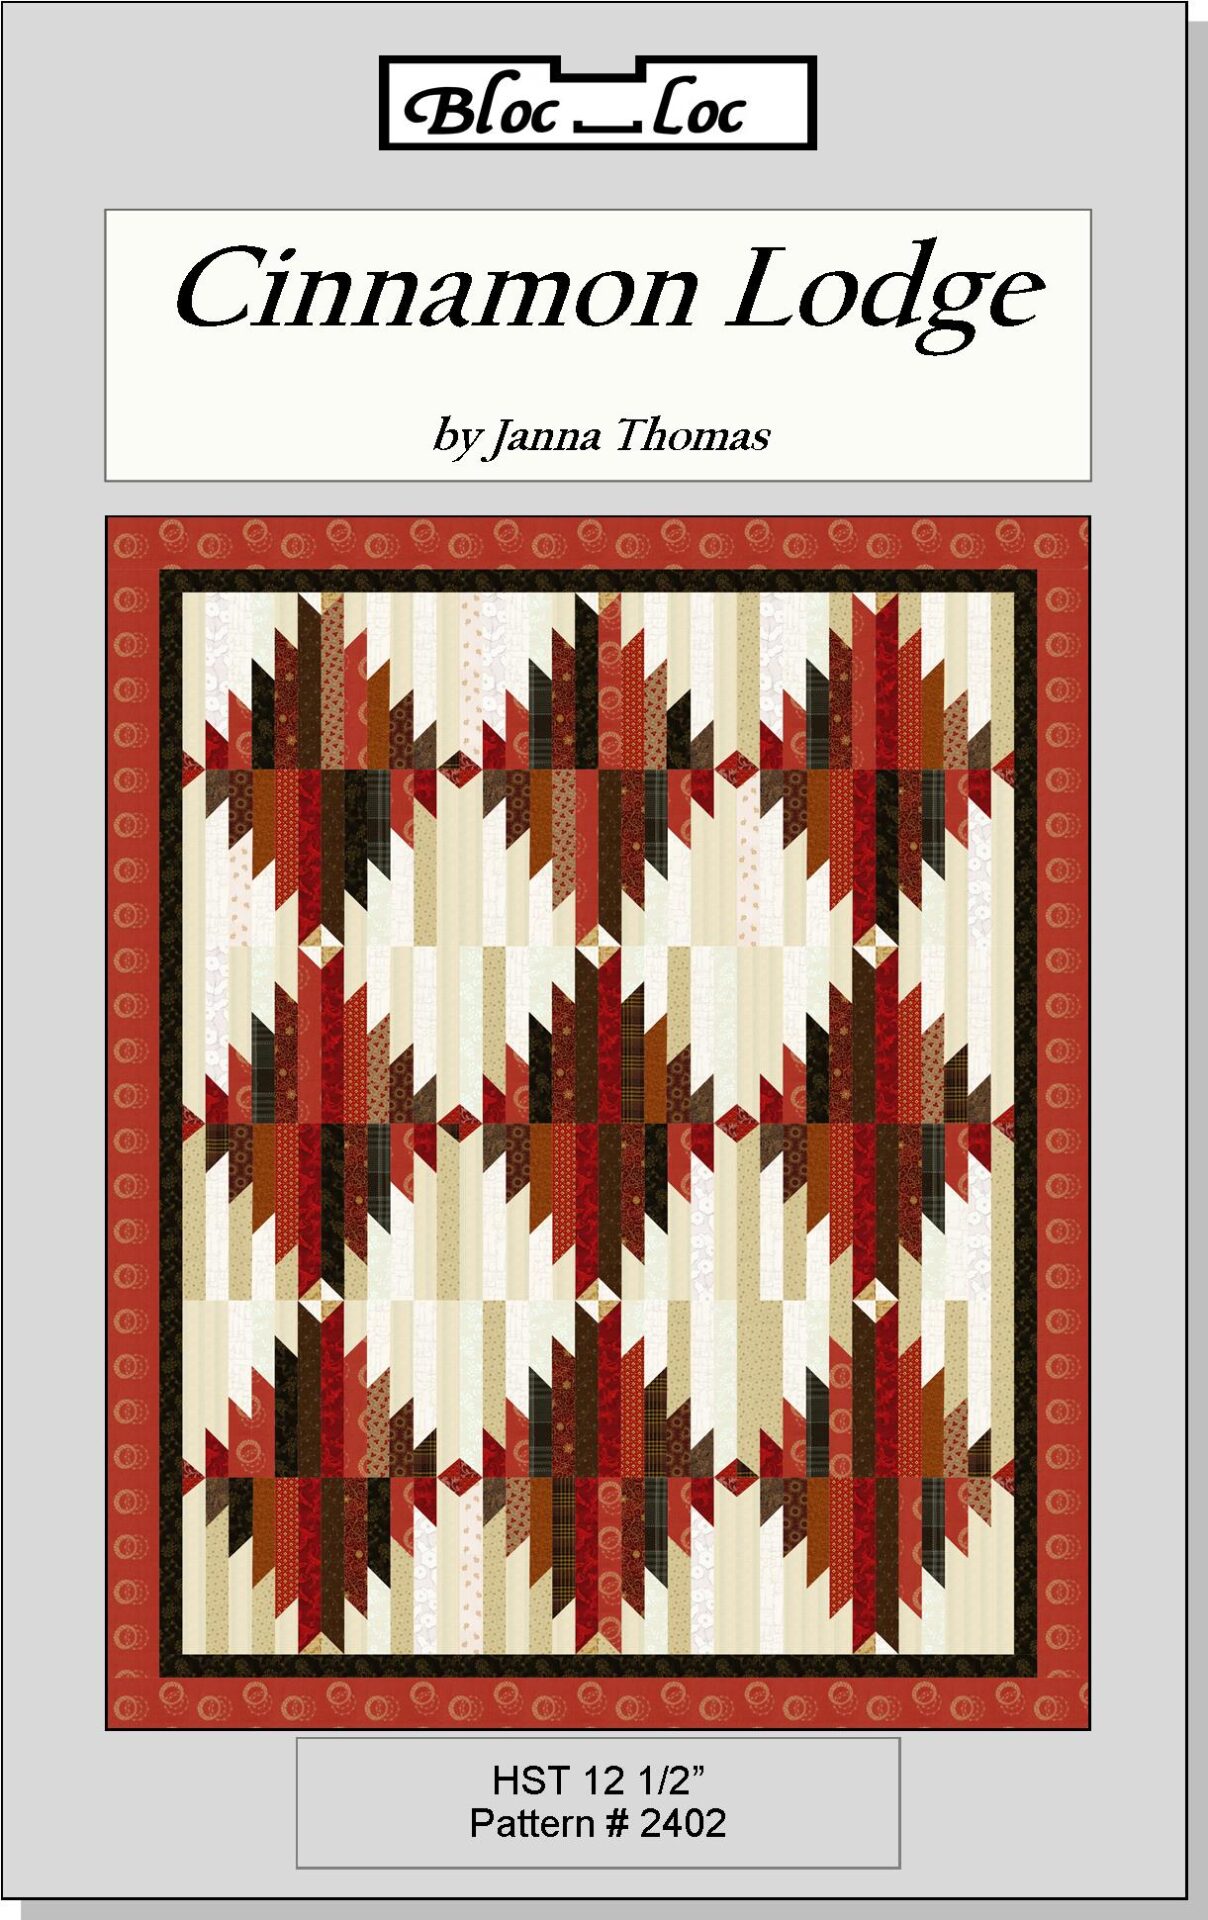 A quilt with red and white designs on it.